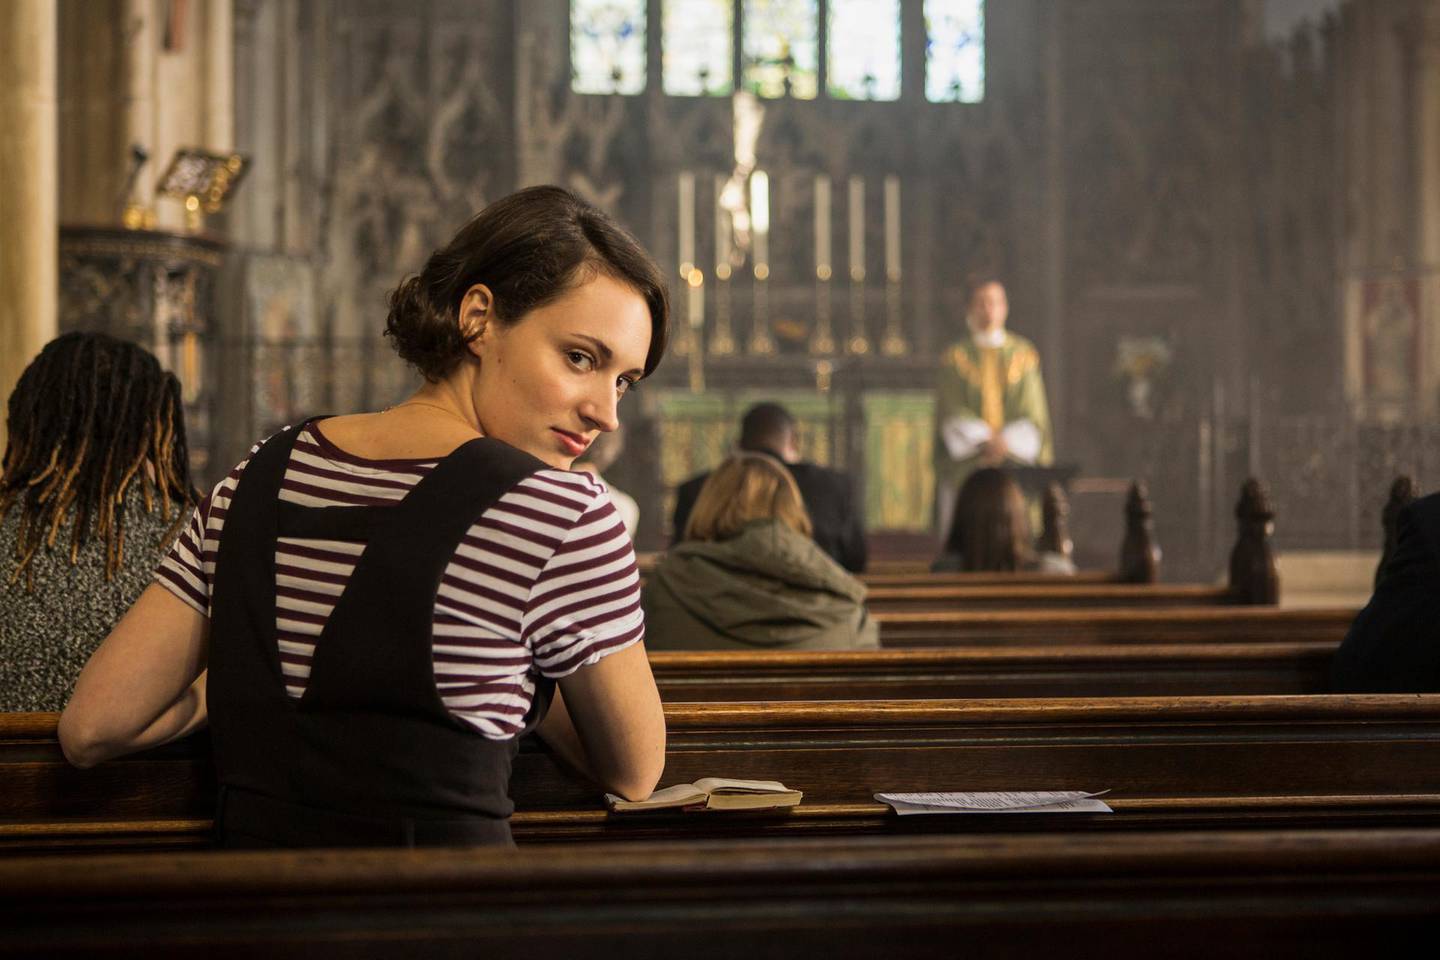 This image released by Amazon Studios shows Phoebe Waller-Bridge in "Fleabag." The program is nominated for a Golden Globe for best comedy series. (Amazon Studios via AP)